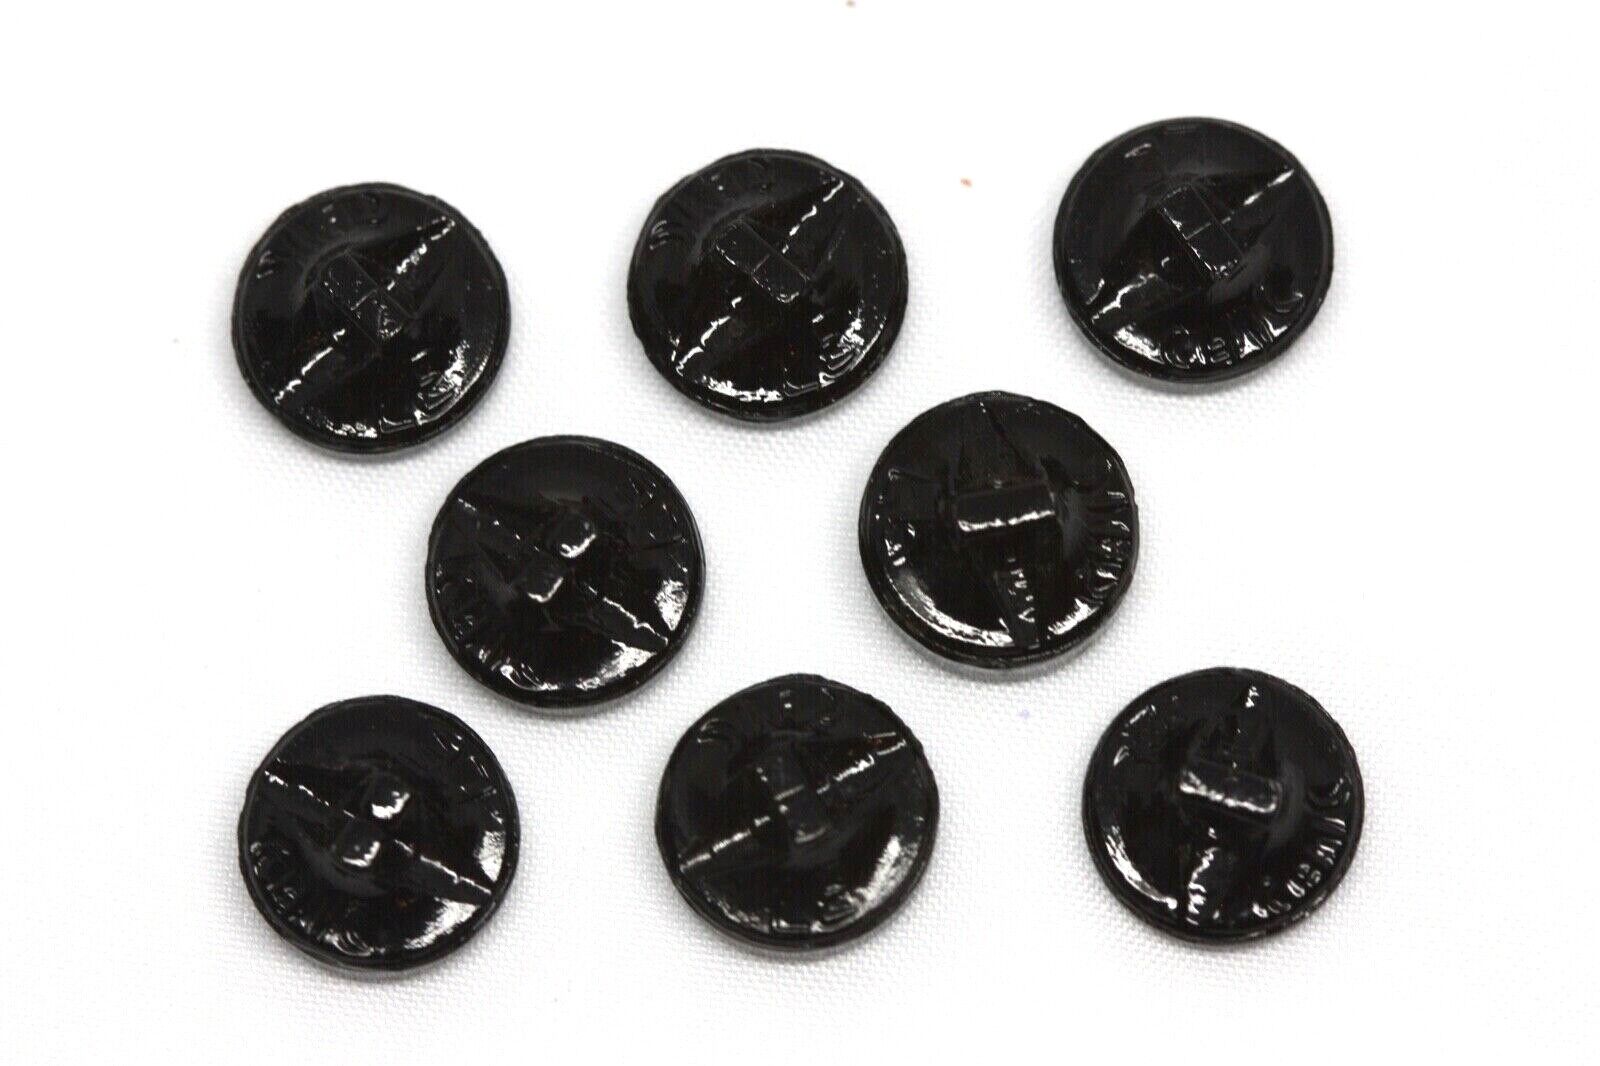 8 Vintage Le Chic Black Glass Honeycomb Buttons Round Faceted Jet Mourning Без бренда - фотография #5